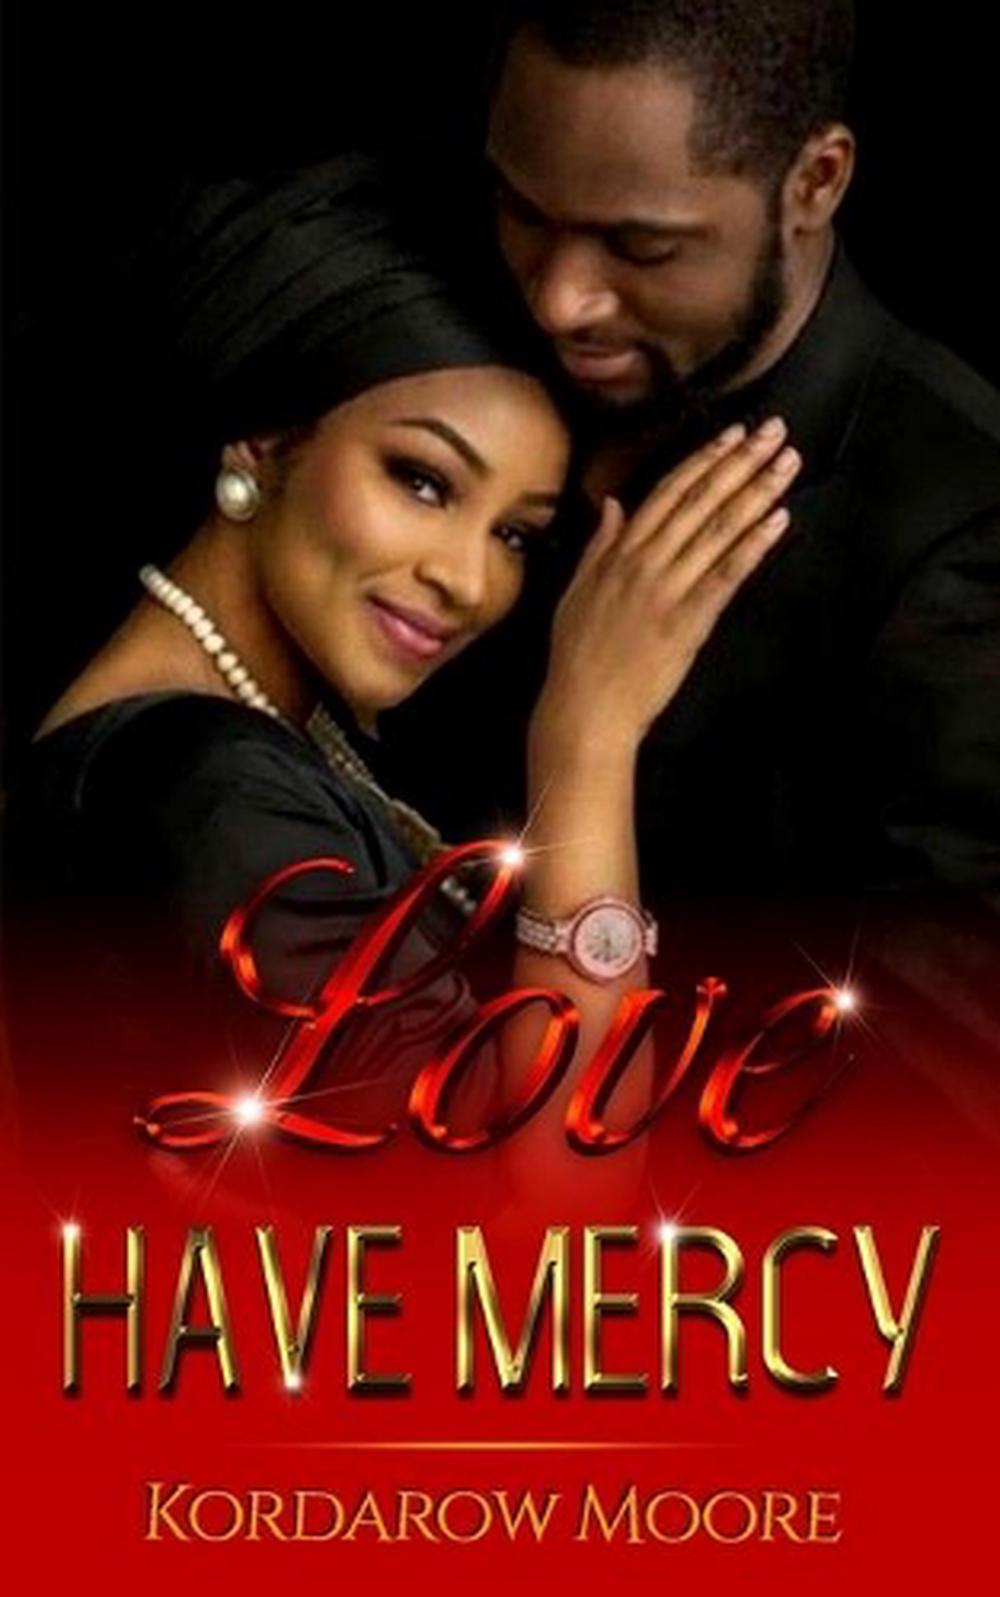 love and mercy movie online free